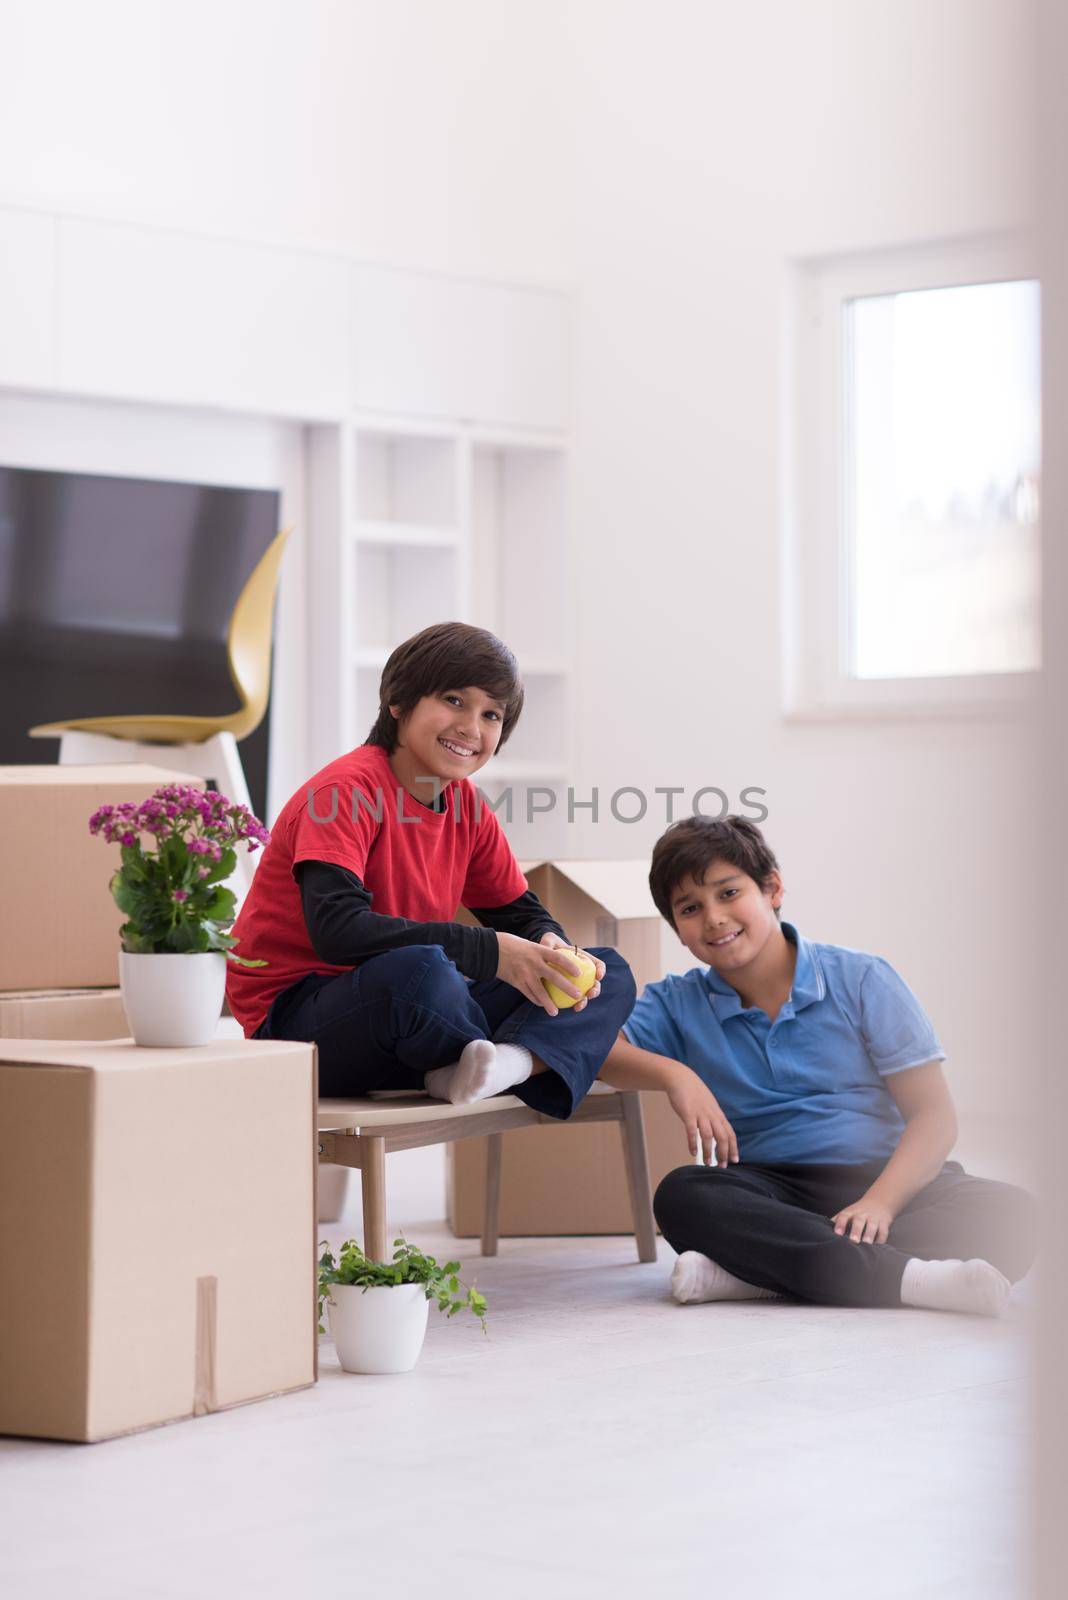 portrait of happy young boys with cardboard boxes around them in a new modern home